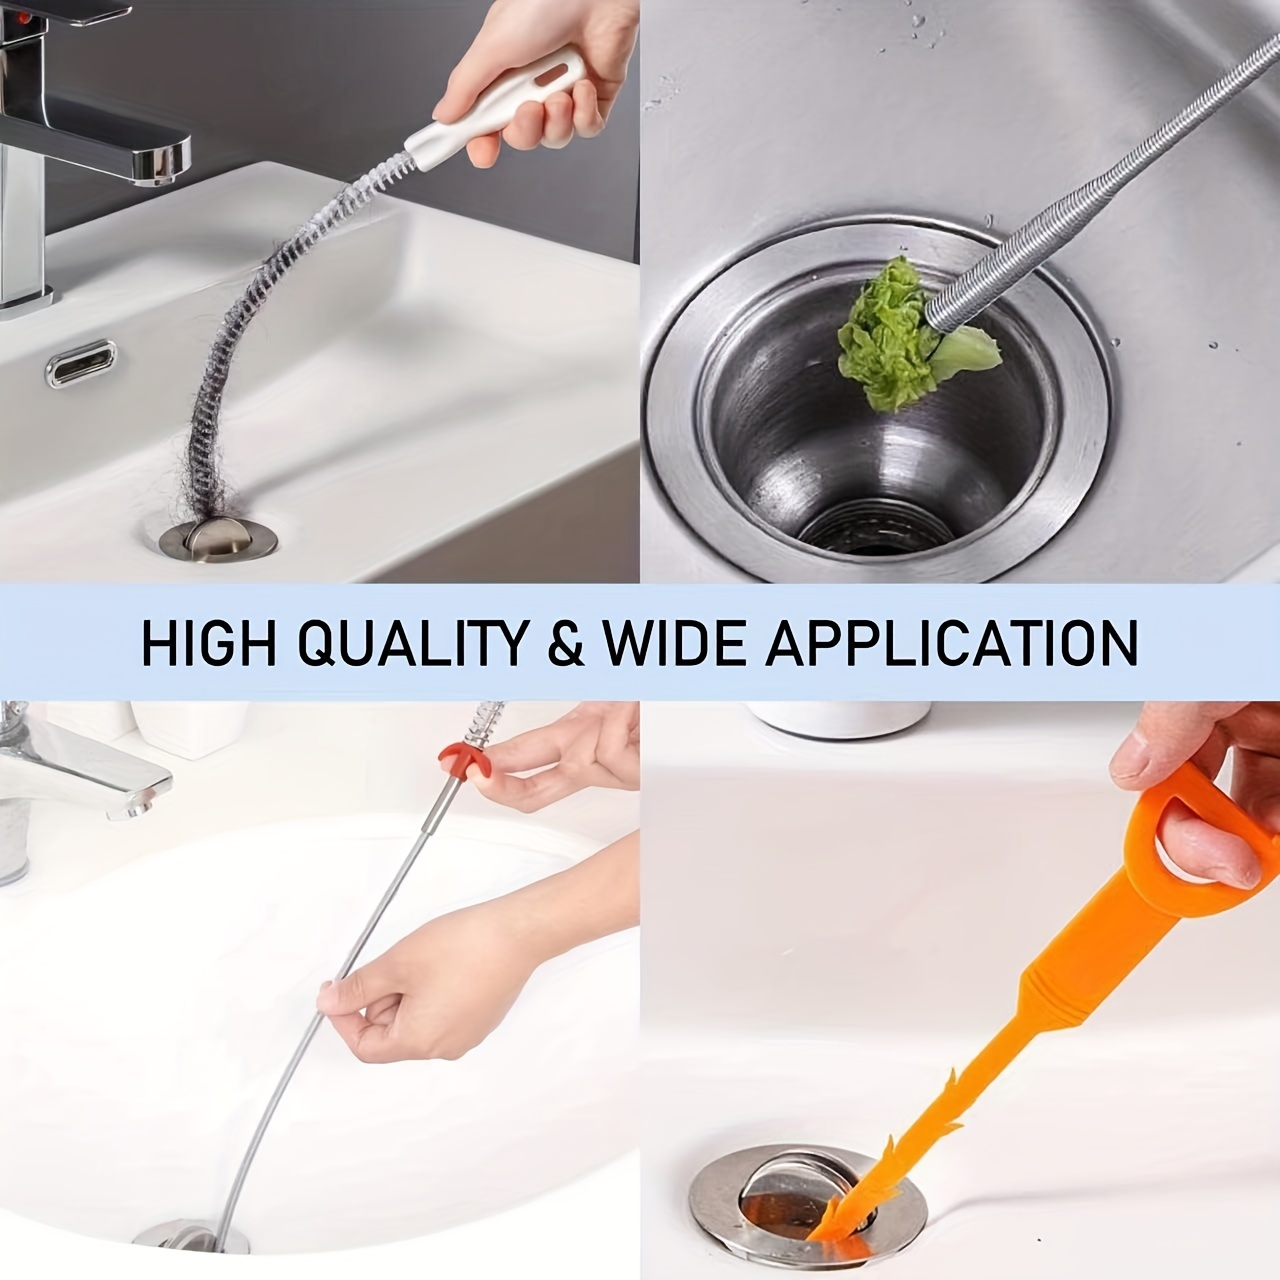 5 Pack Hair Snake Hair Drain Clog Remover Cleaning Tool, Sink Snake Drain Suitable for Unclogging Hair, Kitchen Sinks and Bathtubs, Toilets and Sewer